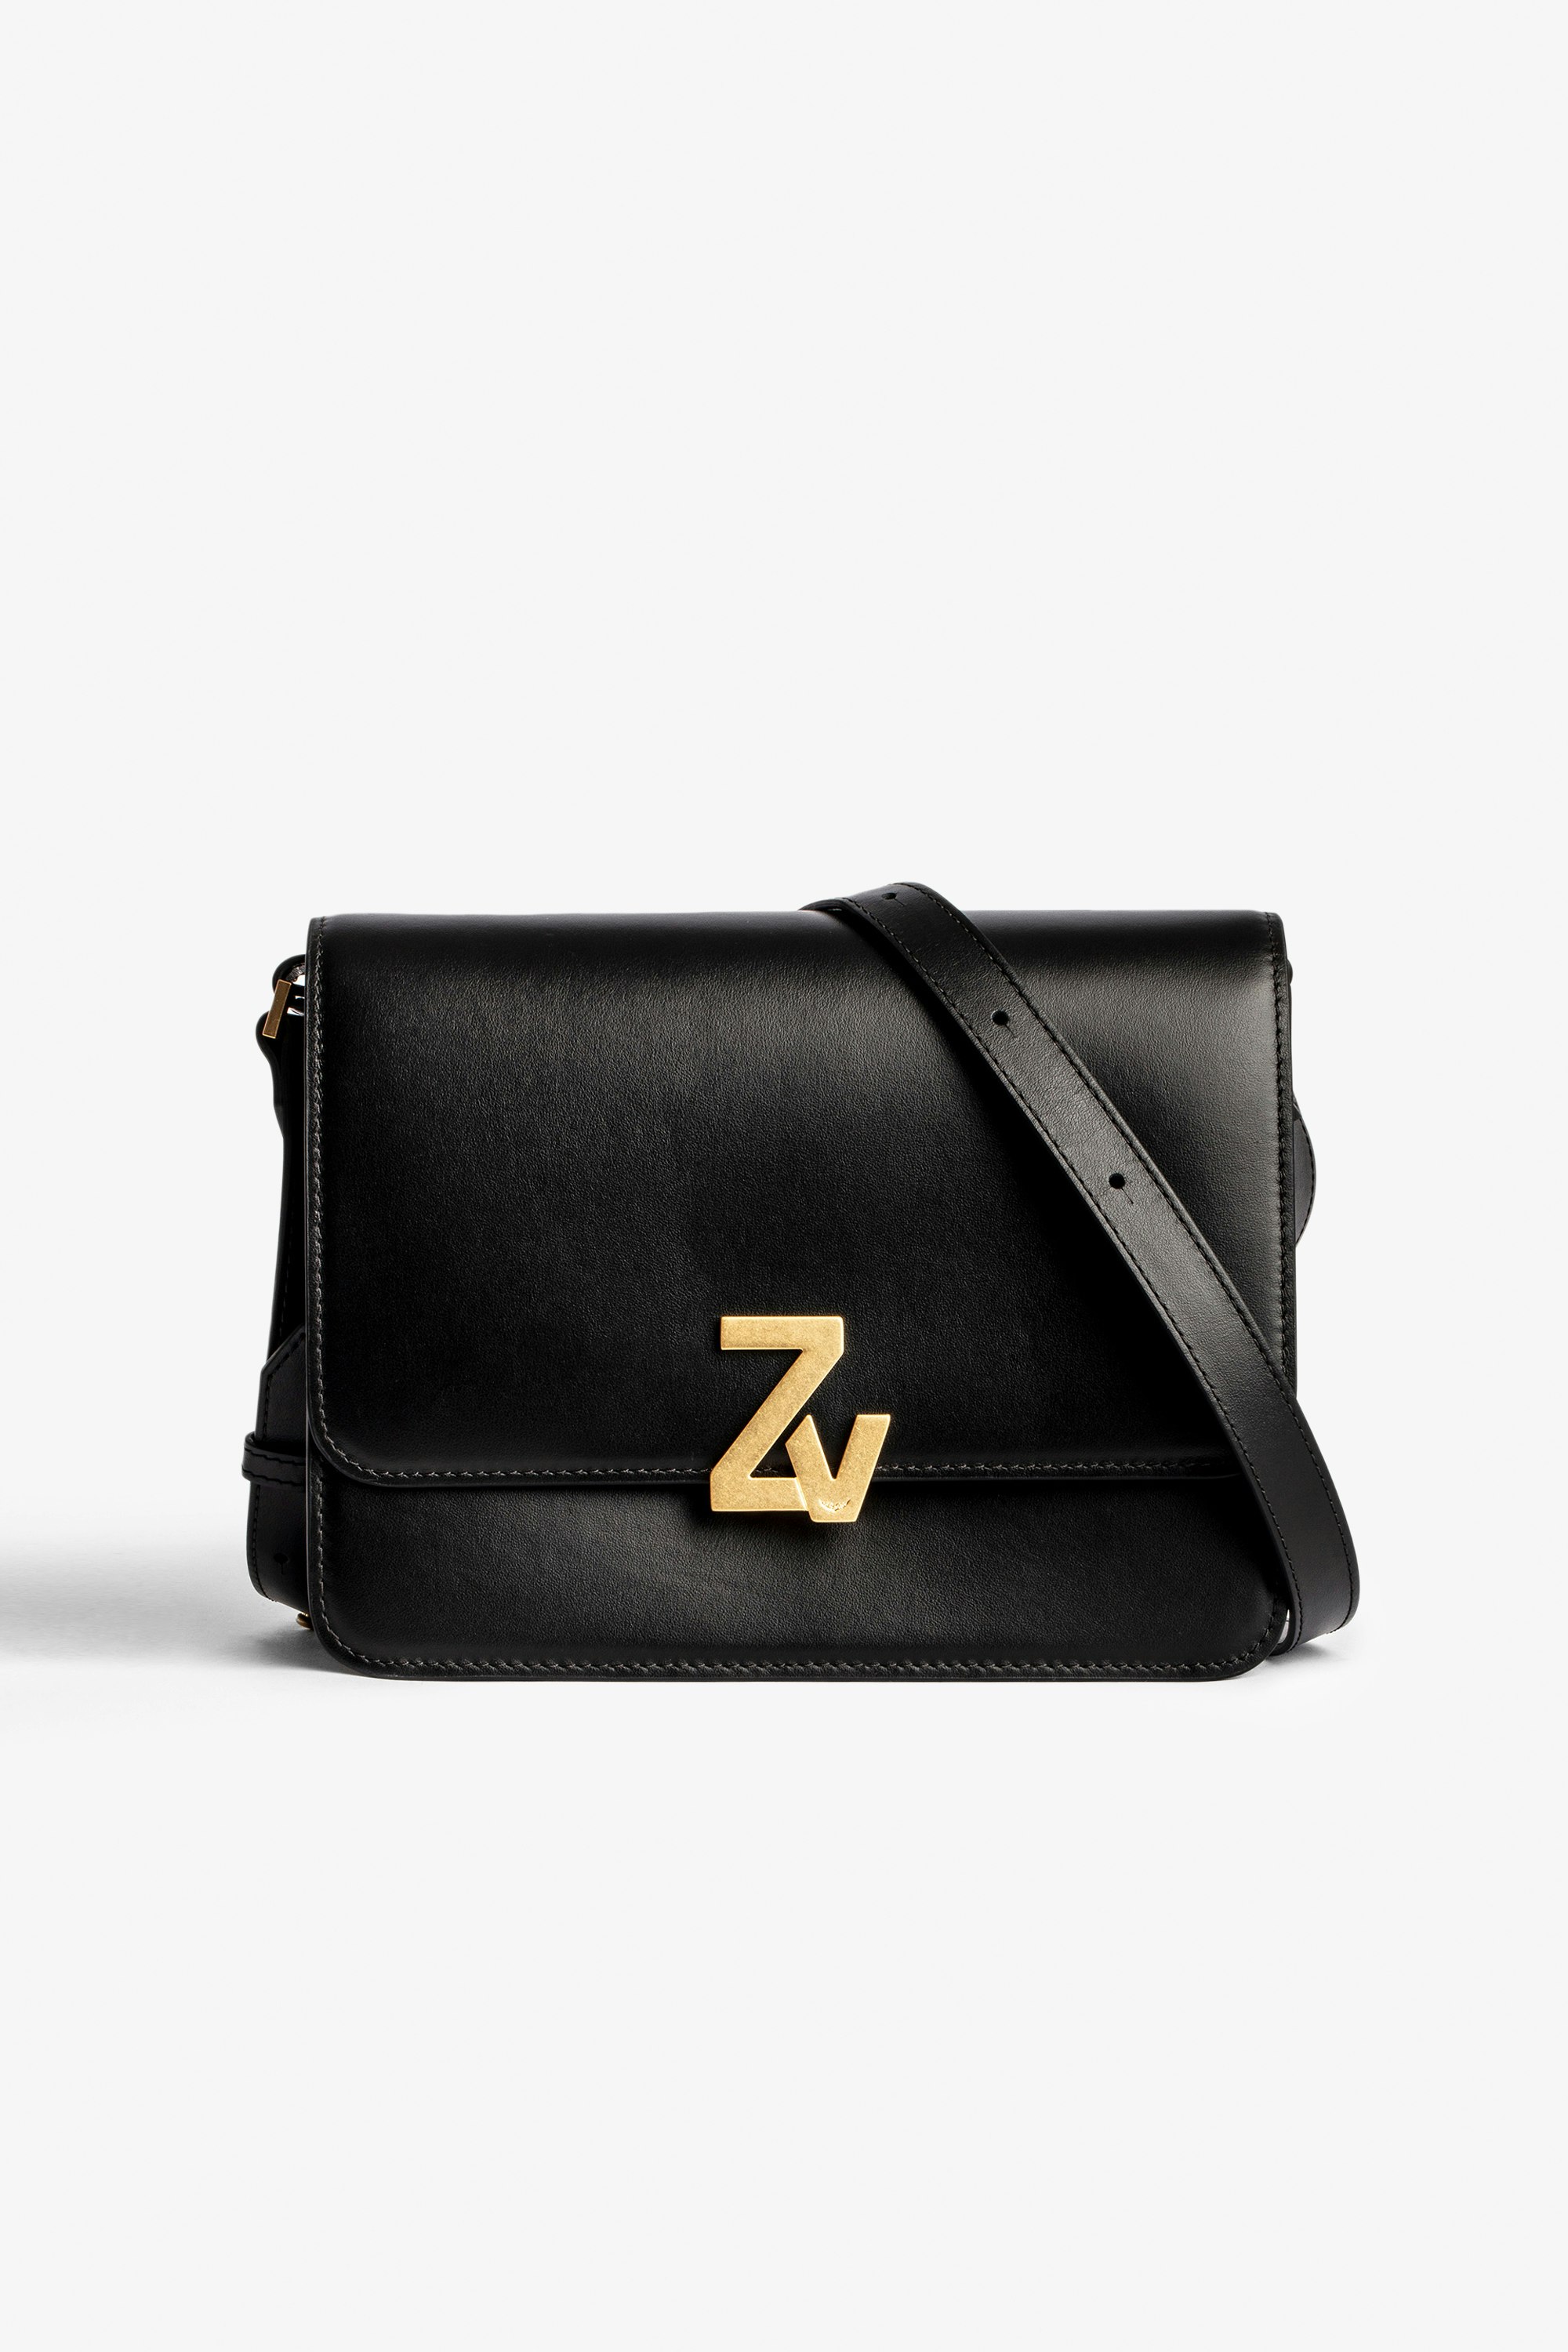 ZV Initiale Le City Bag undefined